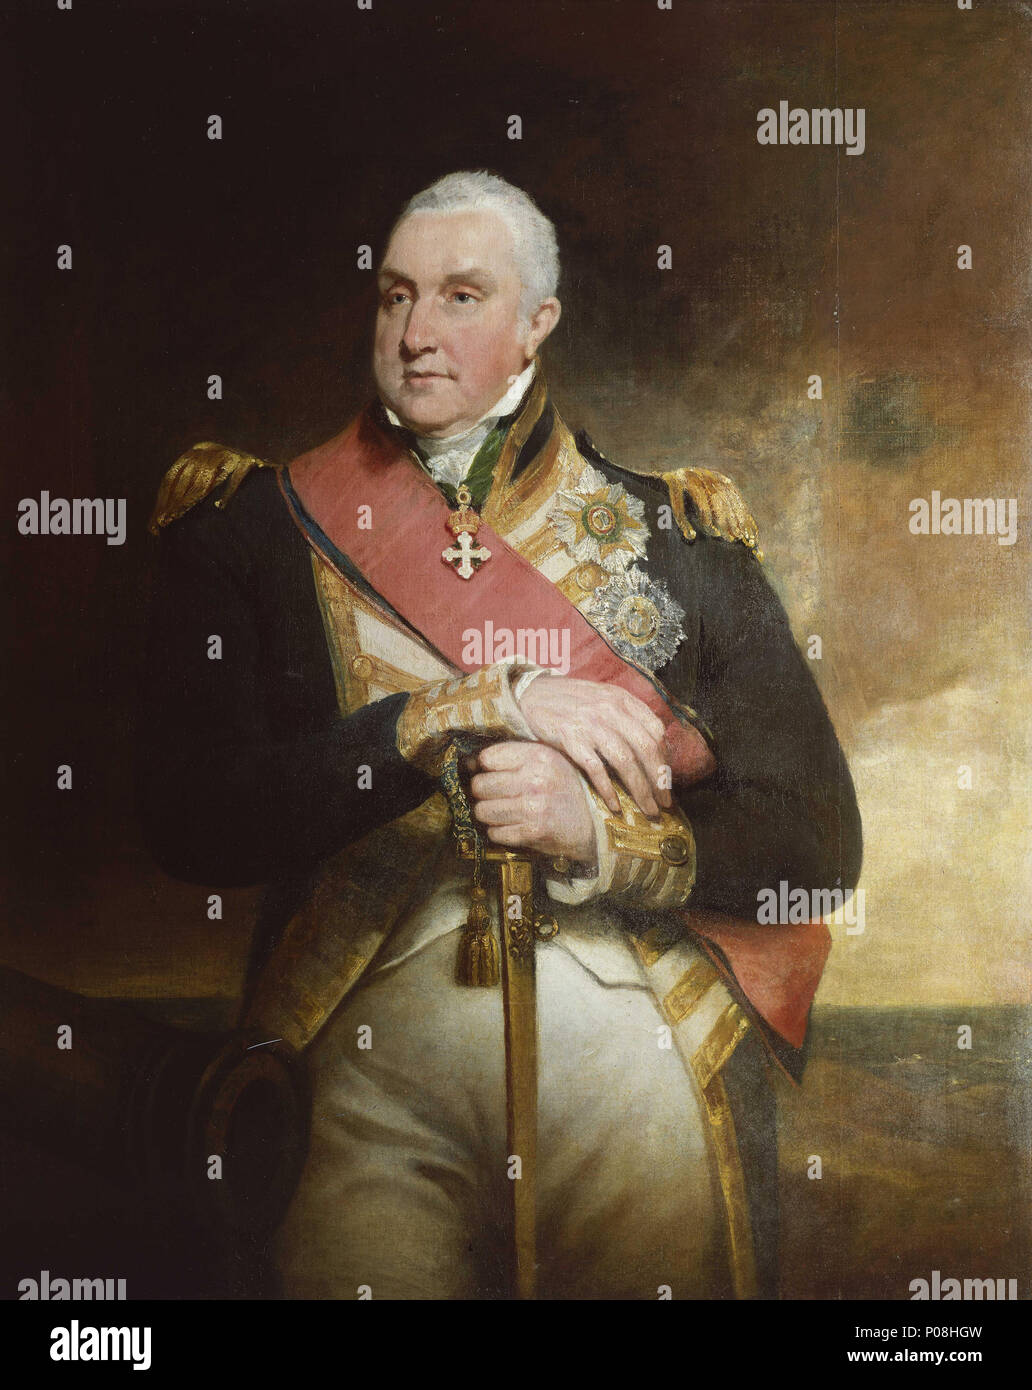 .  English: Admiral Sir Edward Pellew (1757-1833), 1st Viscount Exmouth A three-quarter length portrait, facing to the left, in admiral’s full dress uniform of Edward Pellew, first Viscount Exmouth. His hands are resting on his sword. He wears the ribbon and star of the G.C.B. and the star of St. Ferdinand and Merit. Painted in 1818 it was exhibited at the Royal Academy in 1819. His success as a frigate captain brought him to a responsible position in the Channel Fleet in the early years of the French Revolutionary Wars. While in command of the frigate ‘Indefatigable’ he drove ashore the Frenc Stock Photo